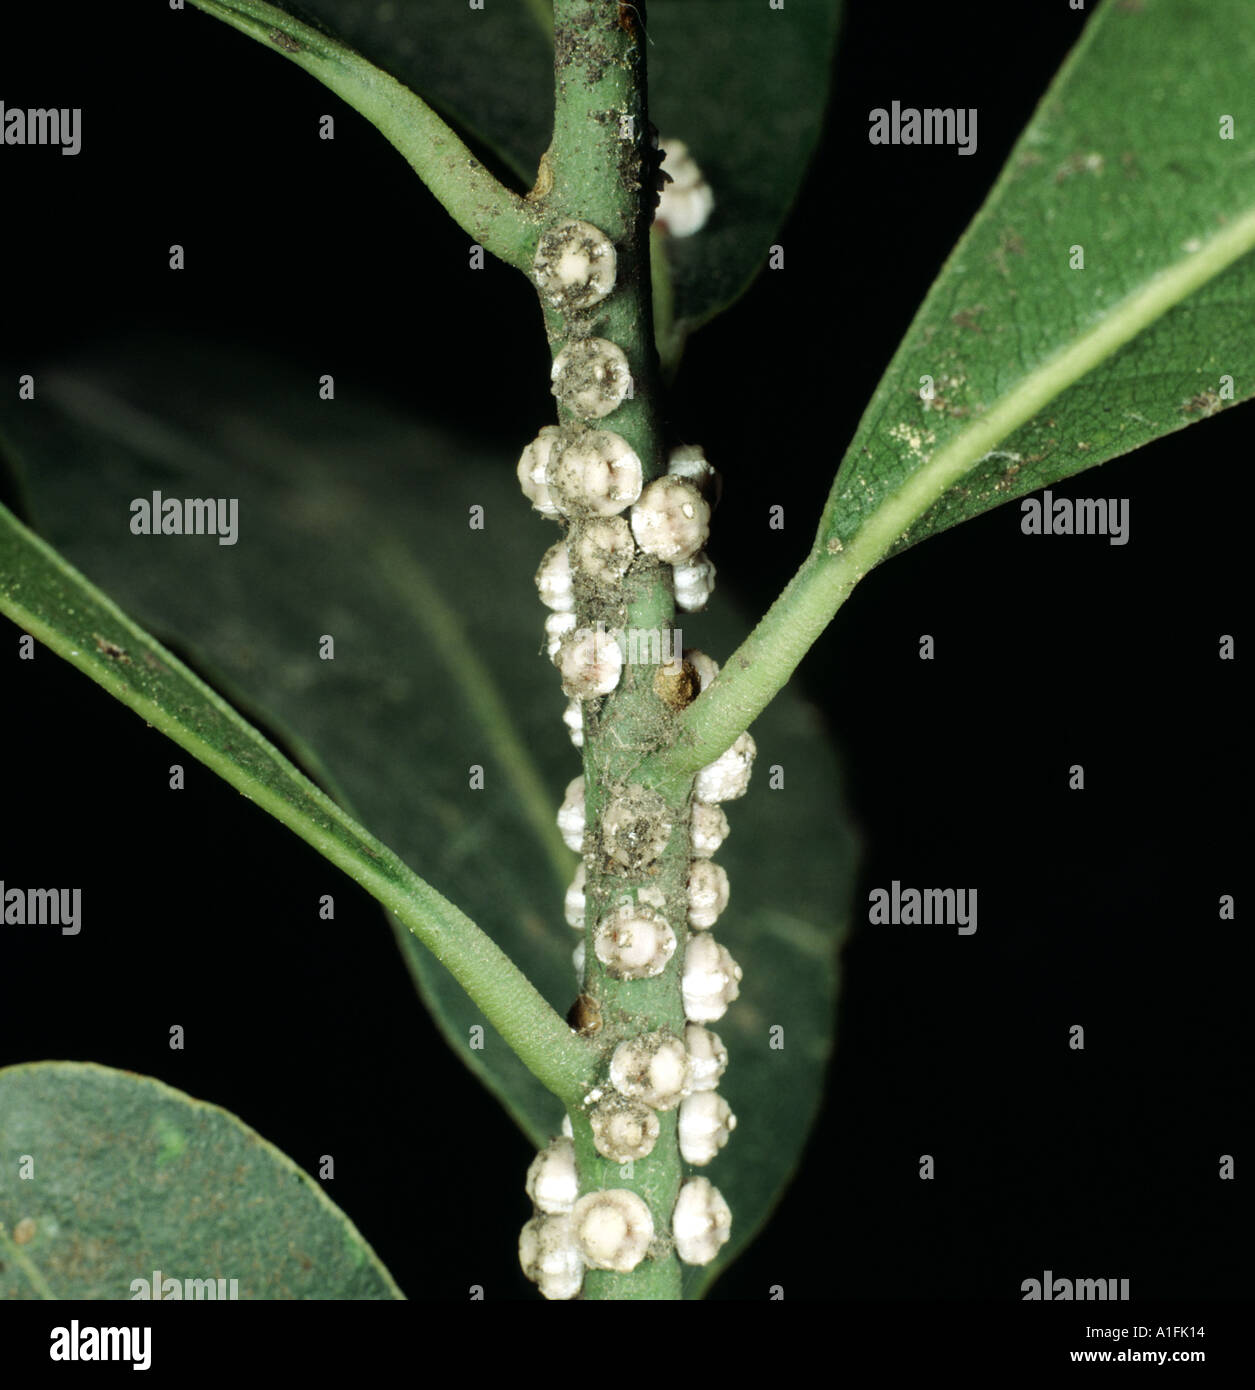 White wax scale insects Ceroplastes spp on new wood of laurel plant Stock Photo